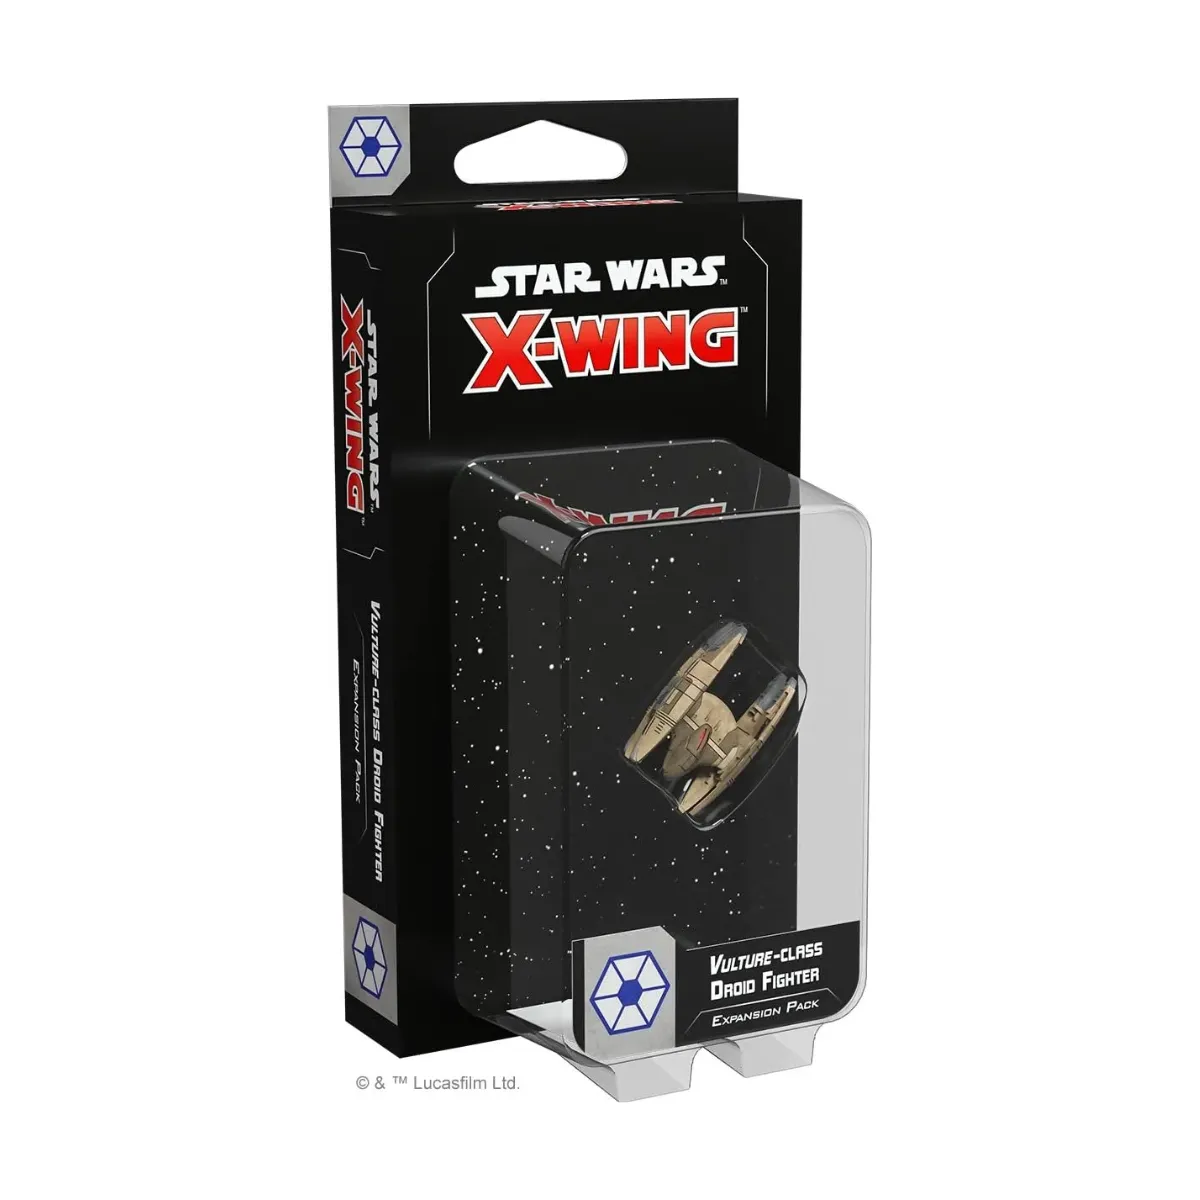 Star Wars X-Wing Second Edition: Separatist Alliance: Vulture-Class Droid Fighter Expansion Pack